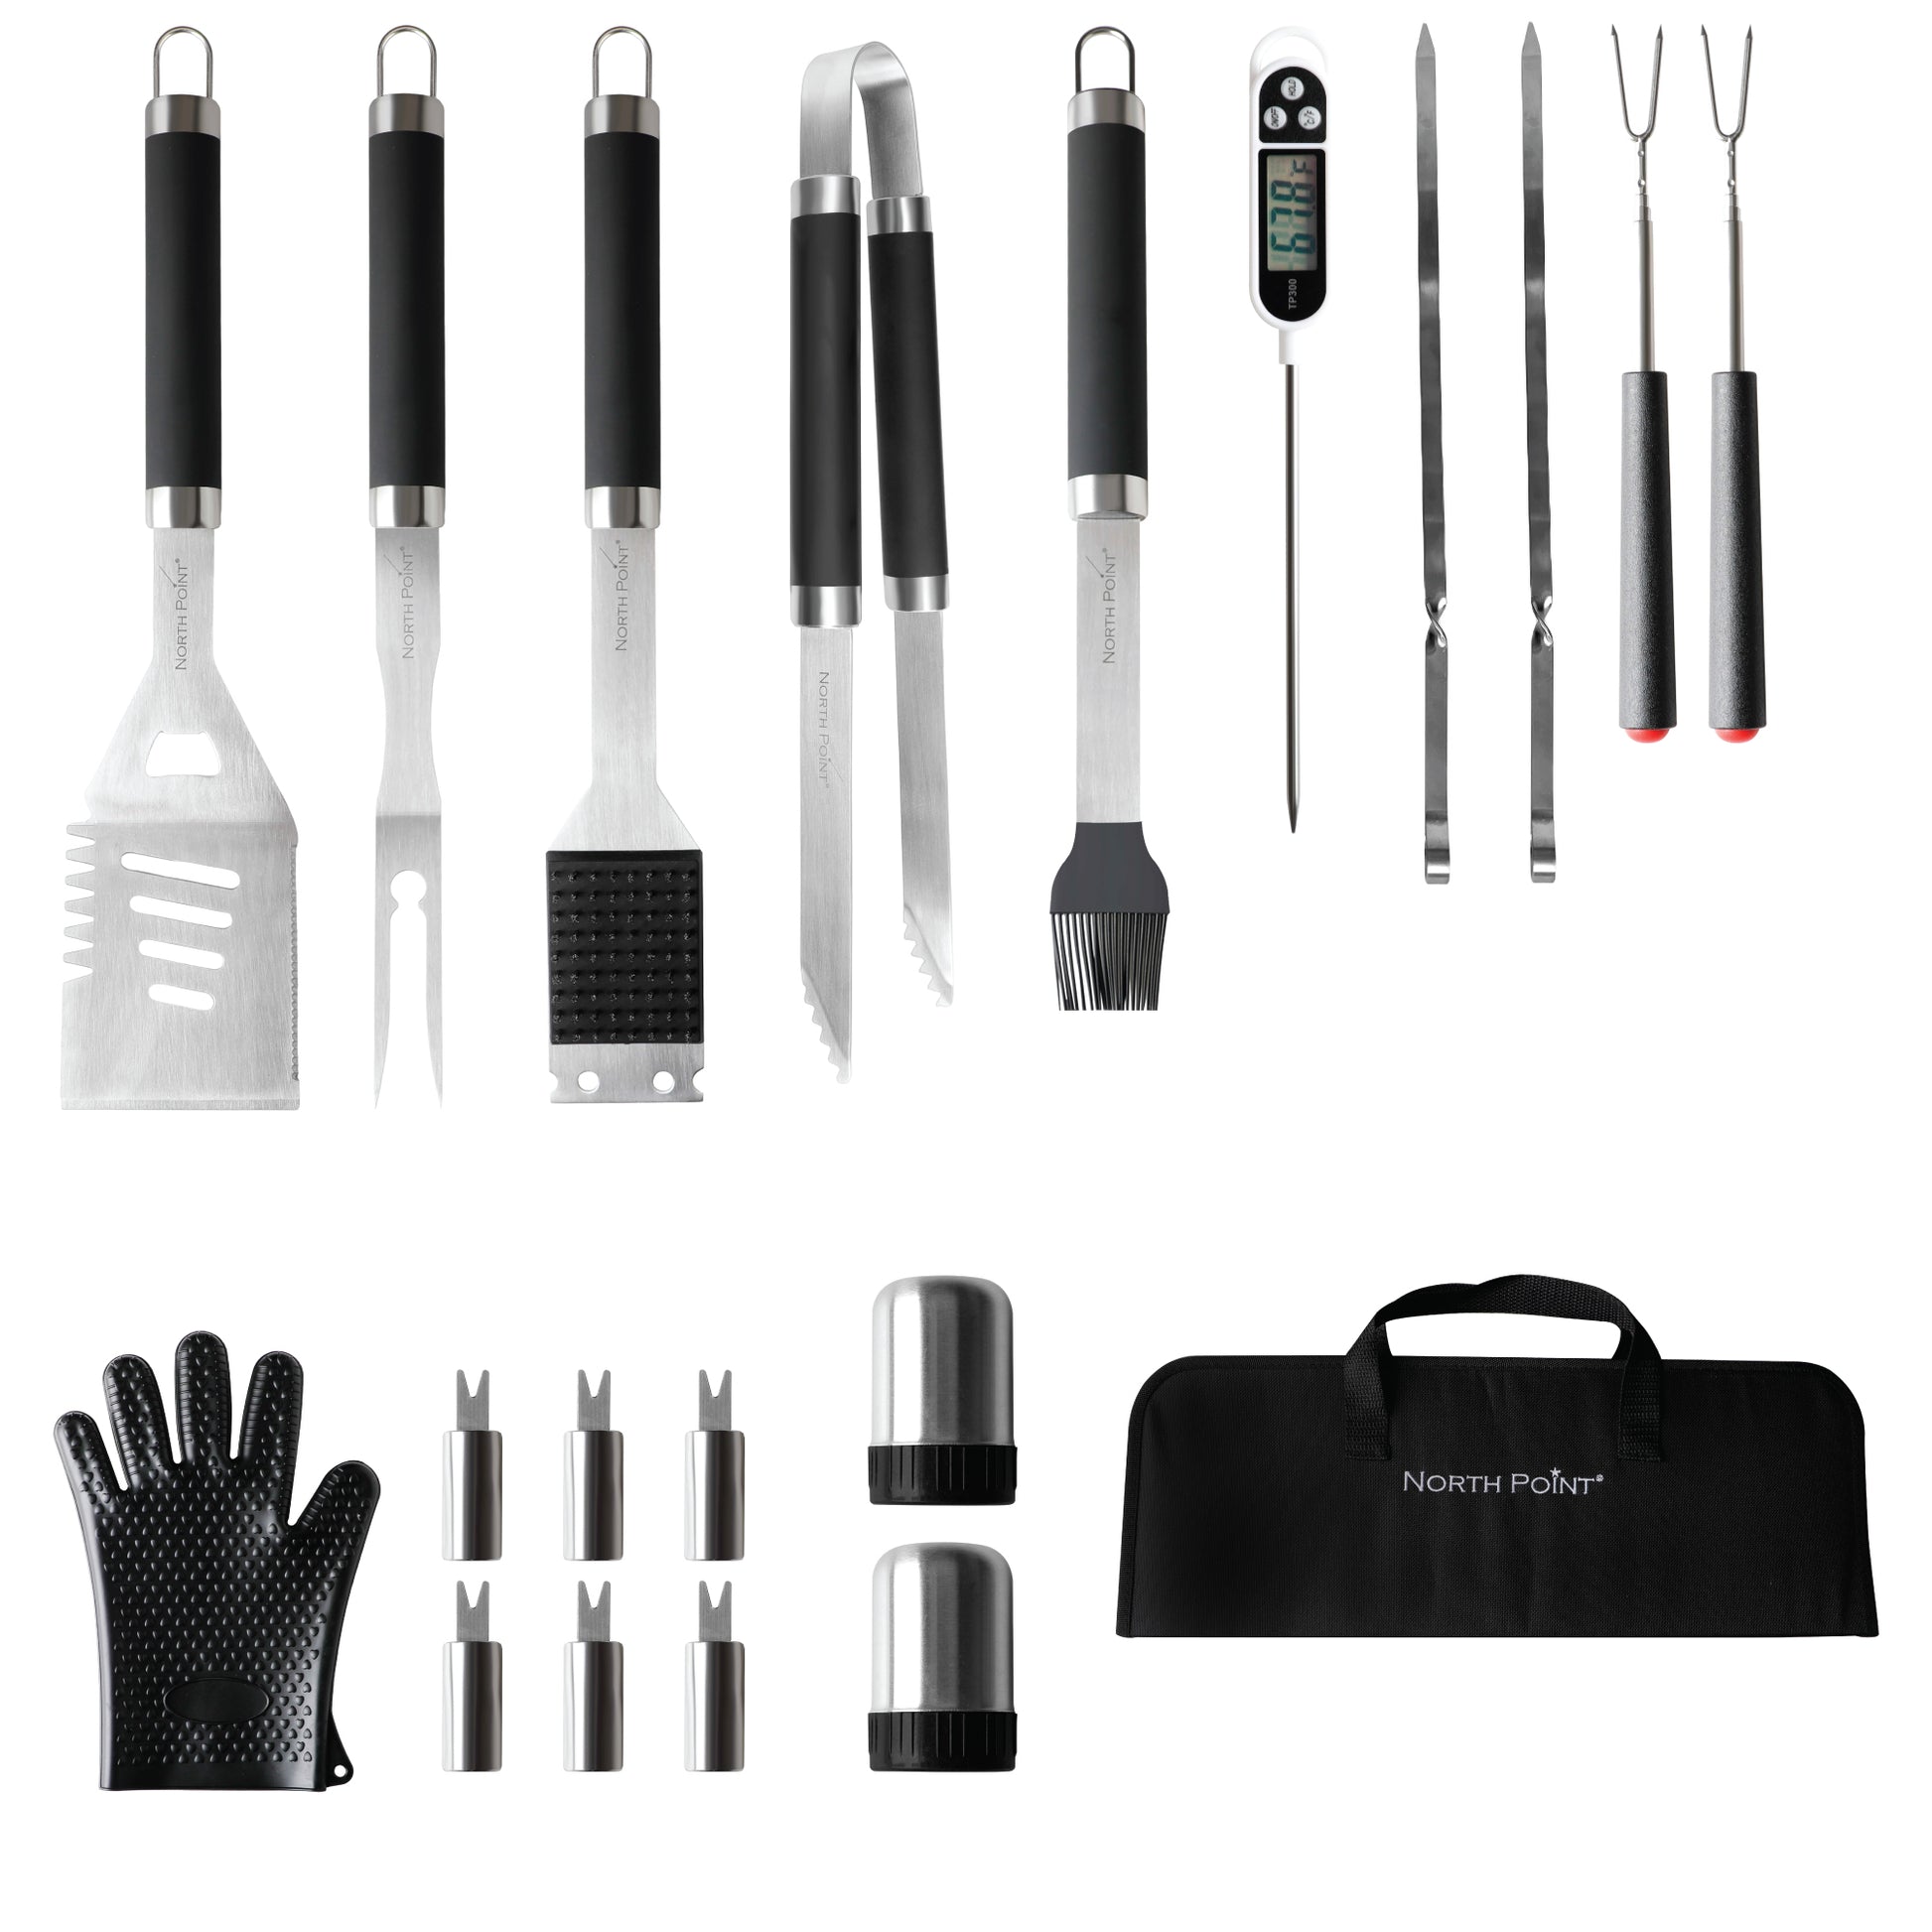 North Point® 20 piece BBQ tool set and carry case with 2 Telescopic Forks, 1 Basting Brush, 1 Grill Brush, 1 Spatula, 1 Fork, 1 Tongs, 2 Skewers, 1 Thermometer, 1 Mitten, 6 Corn Holders and 1 Pair of Salt and Pepper Shaker